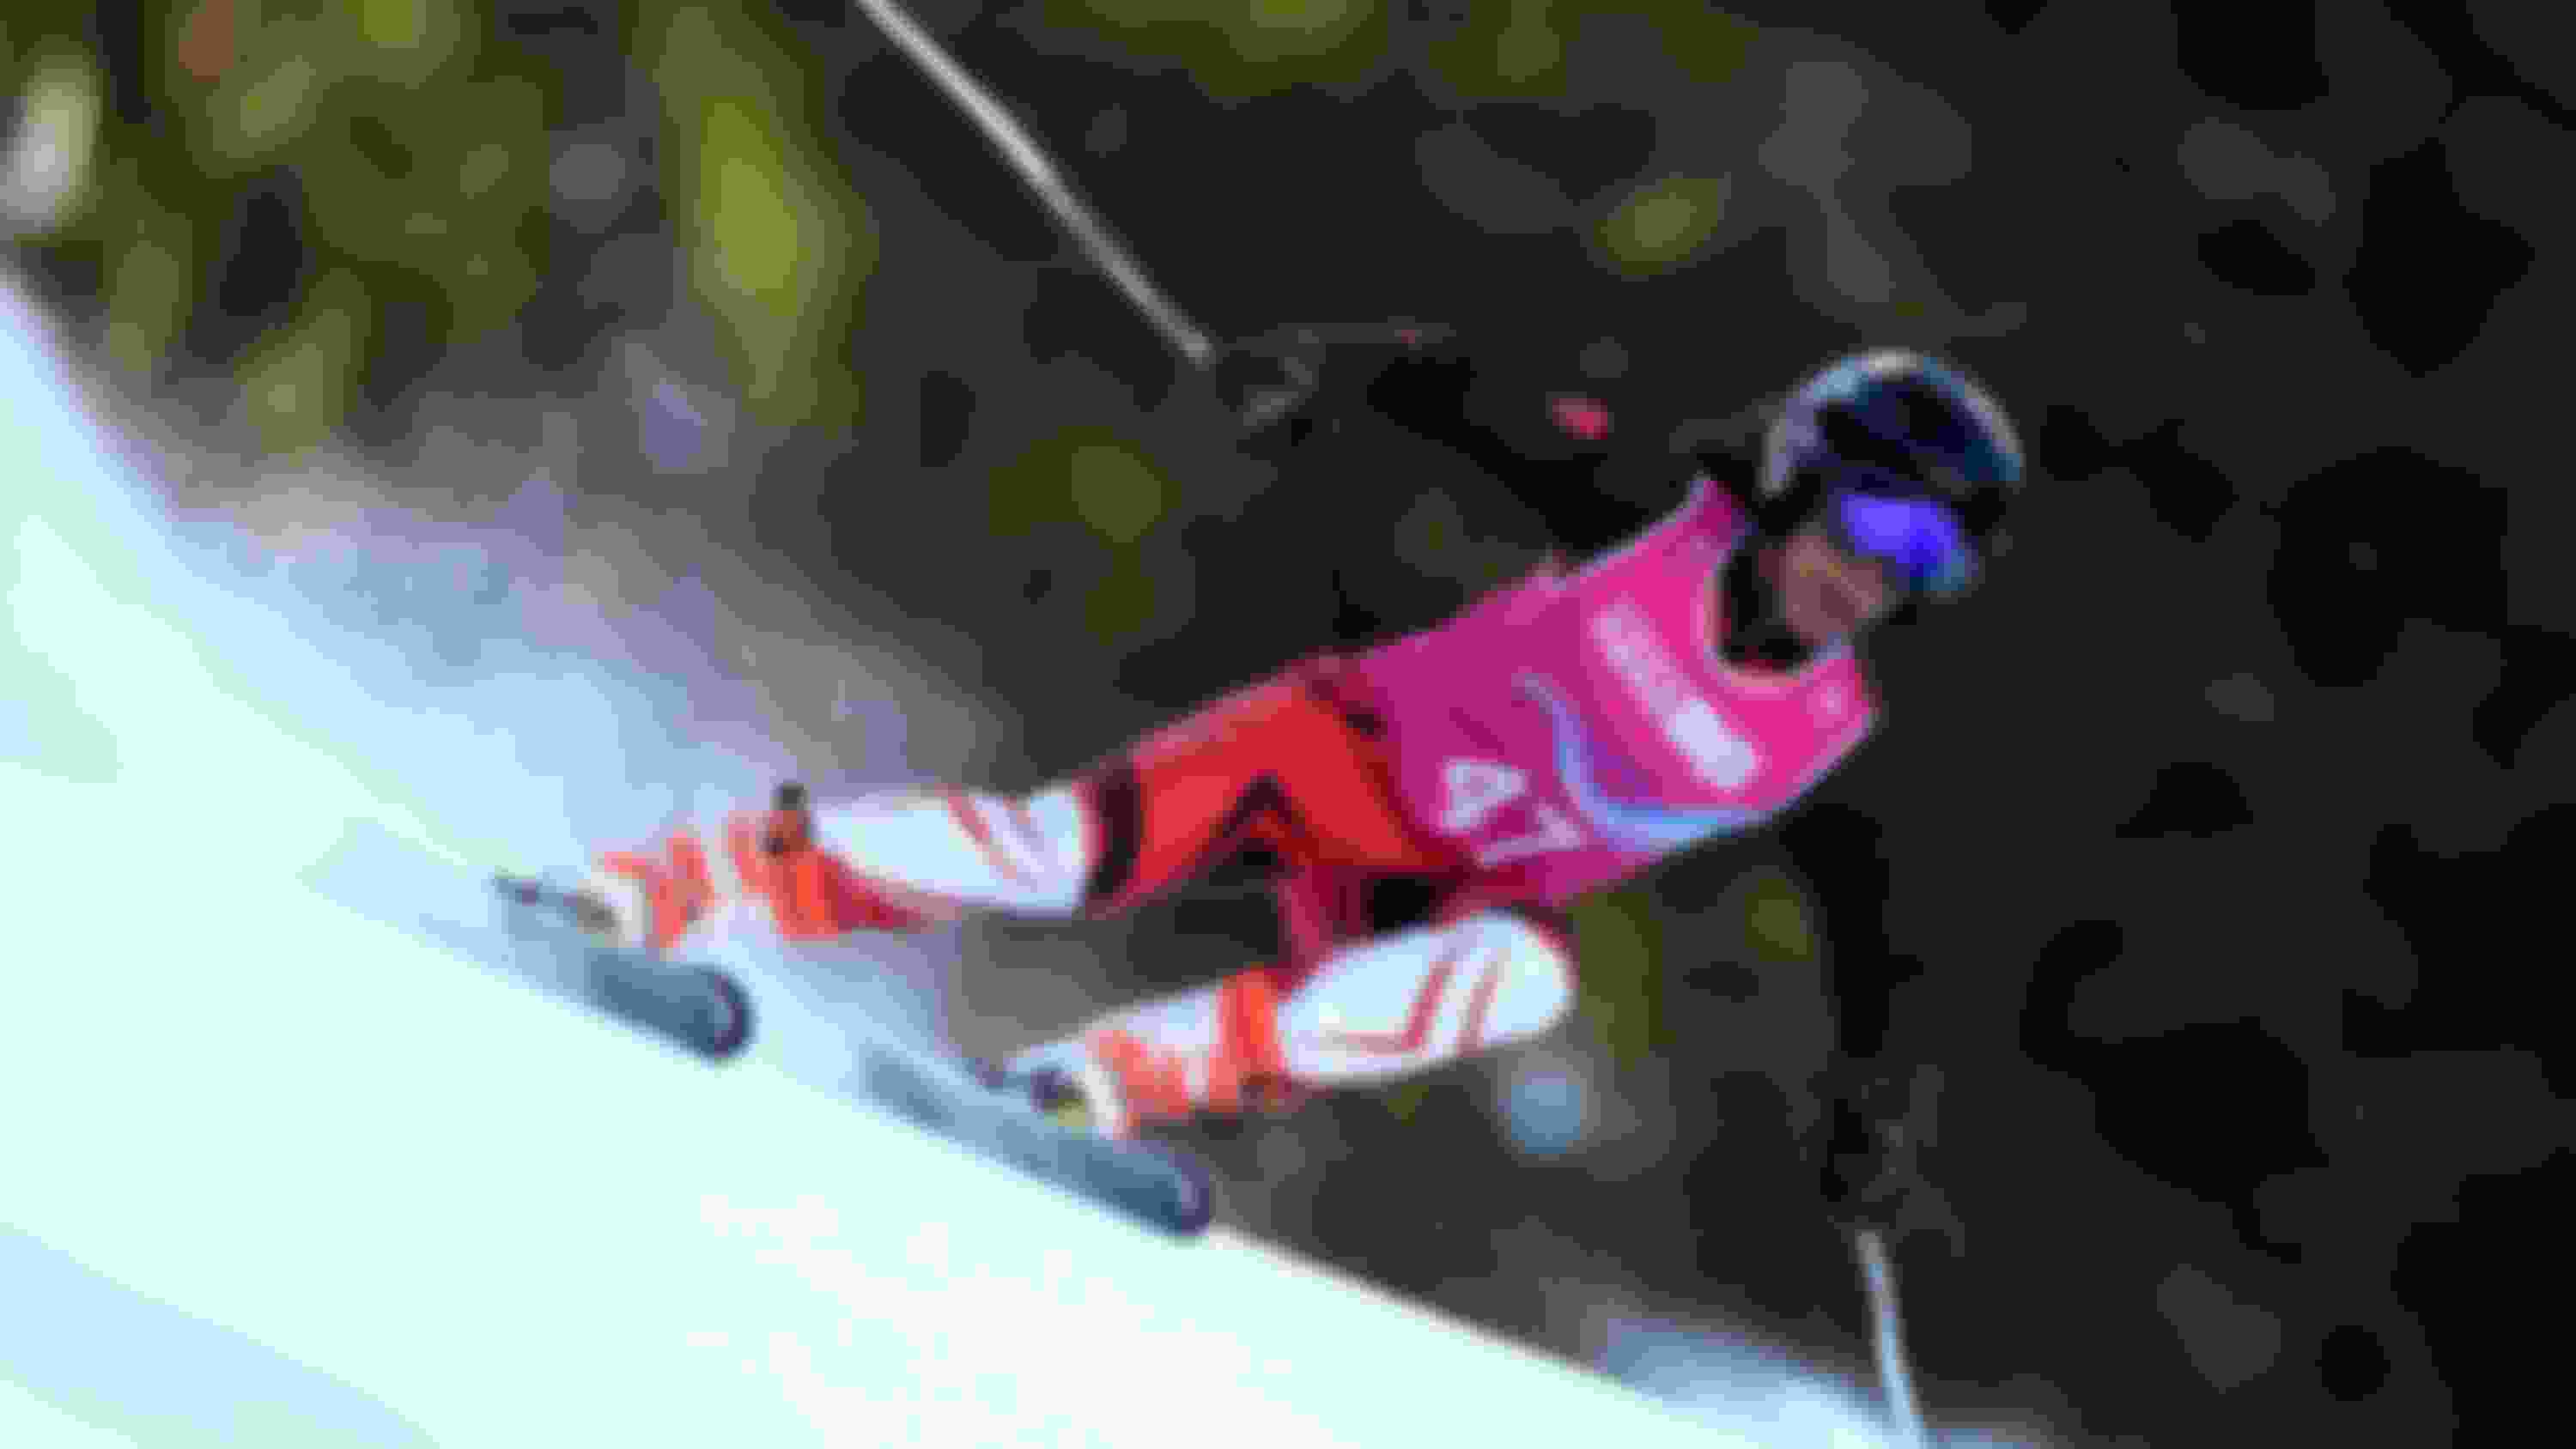 Abigail Vieira of Trinidad and Tobago competes in Super-G women's alpine skiing at the 2020 Winter Youth Olympics in Lausanne.